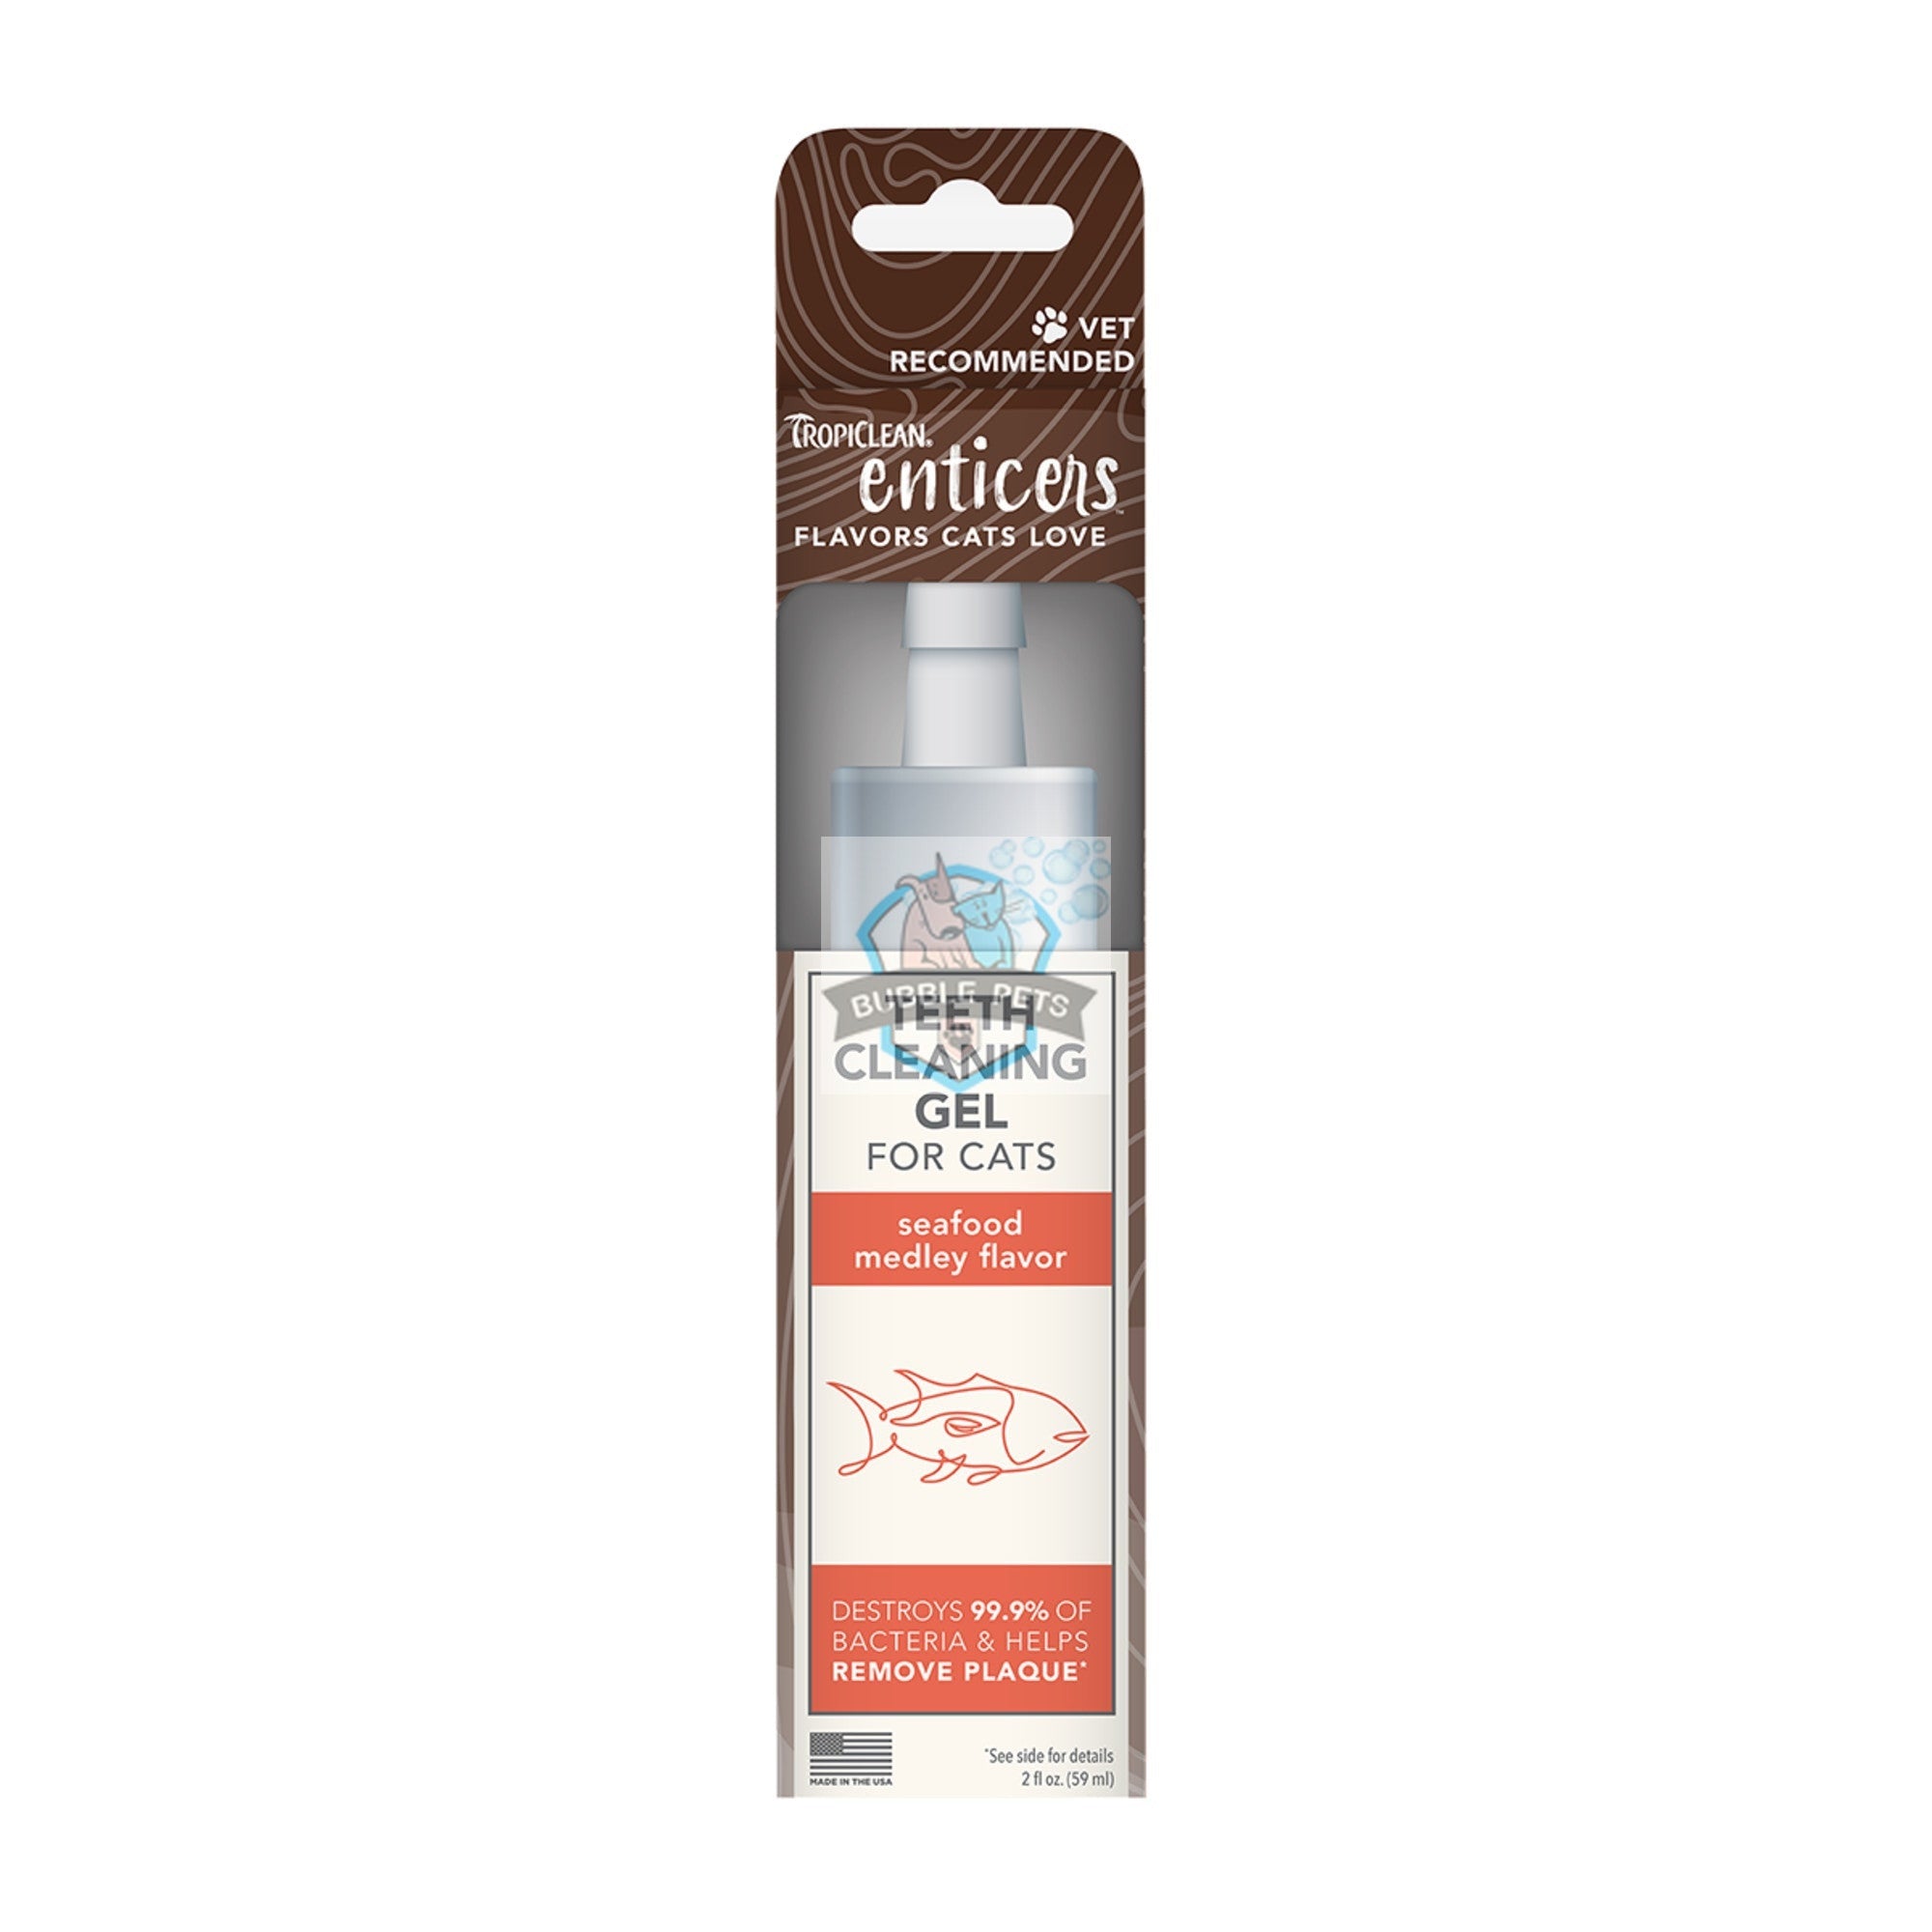 TropiClean Enticers Teeth Cleaning Gel for Cats